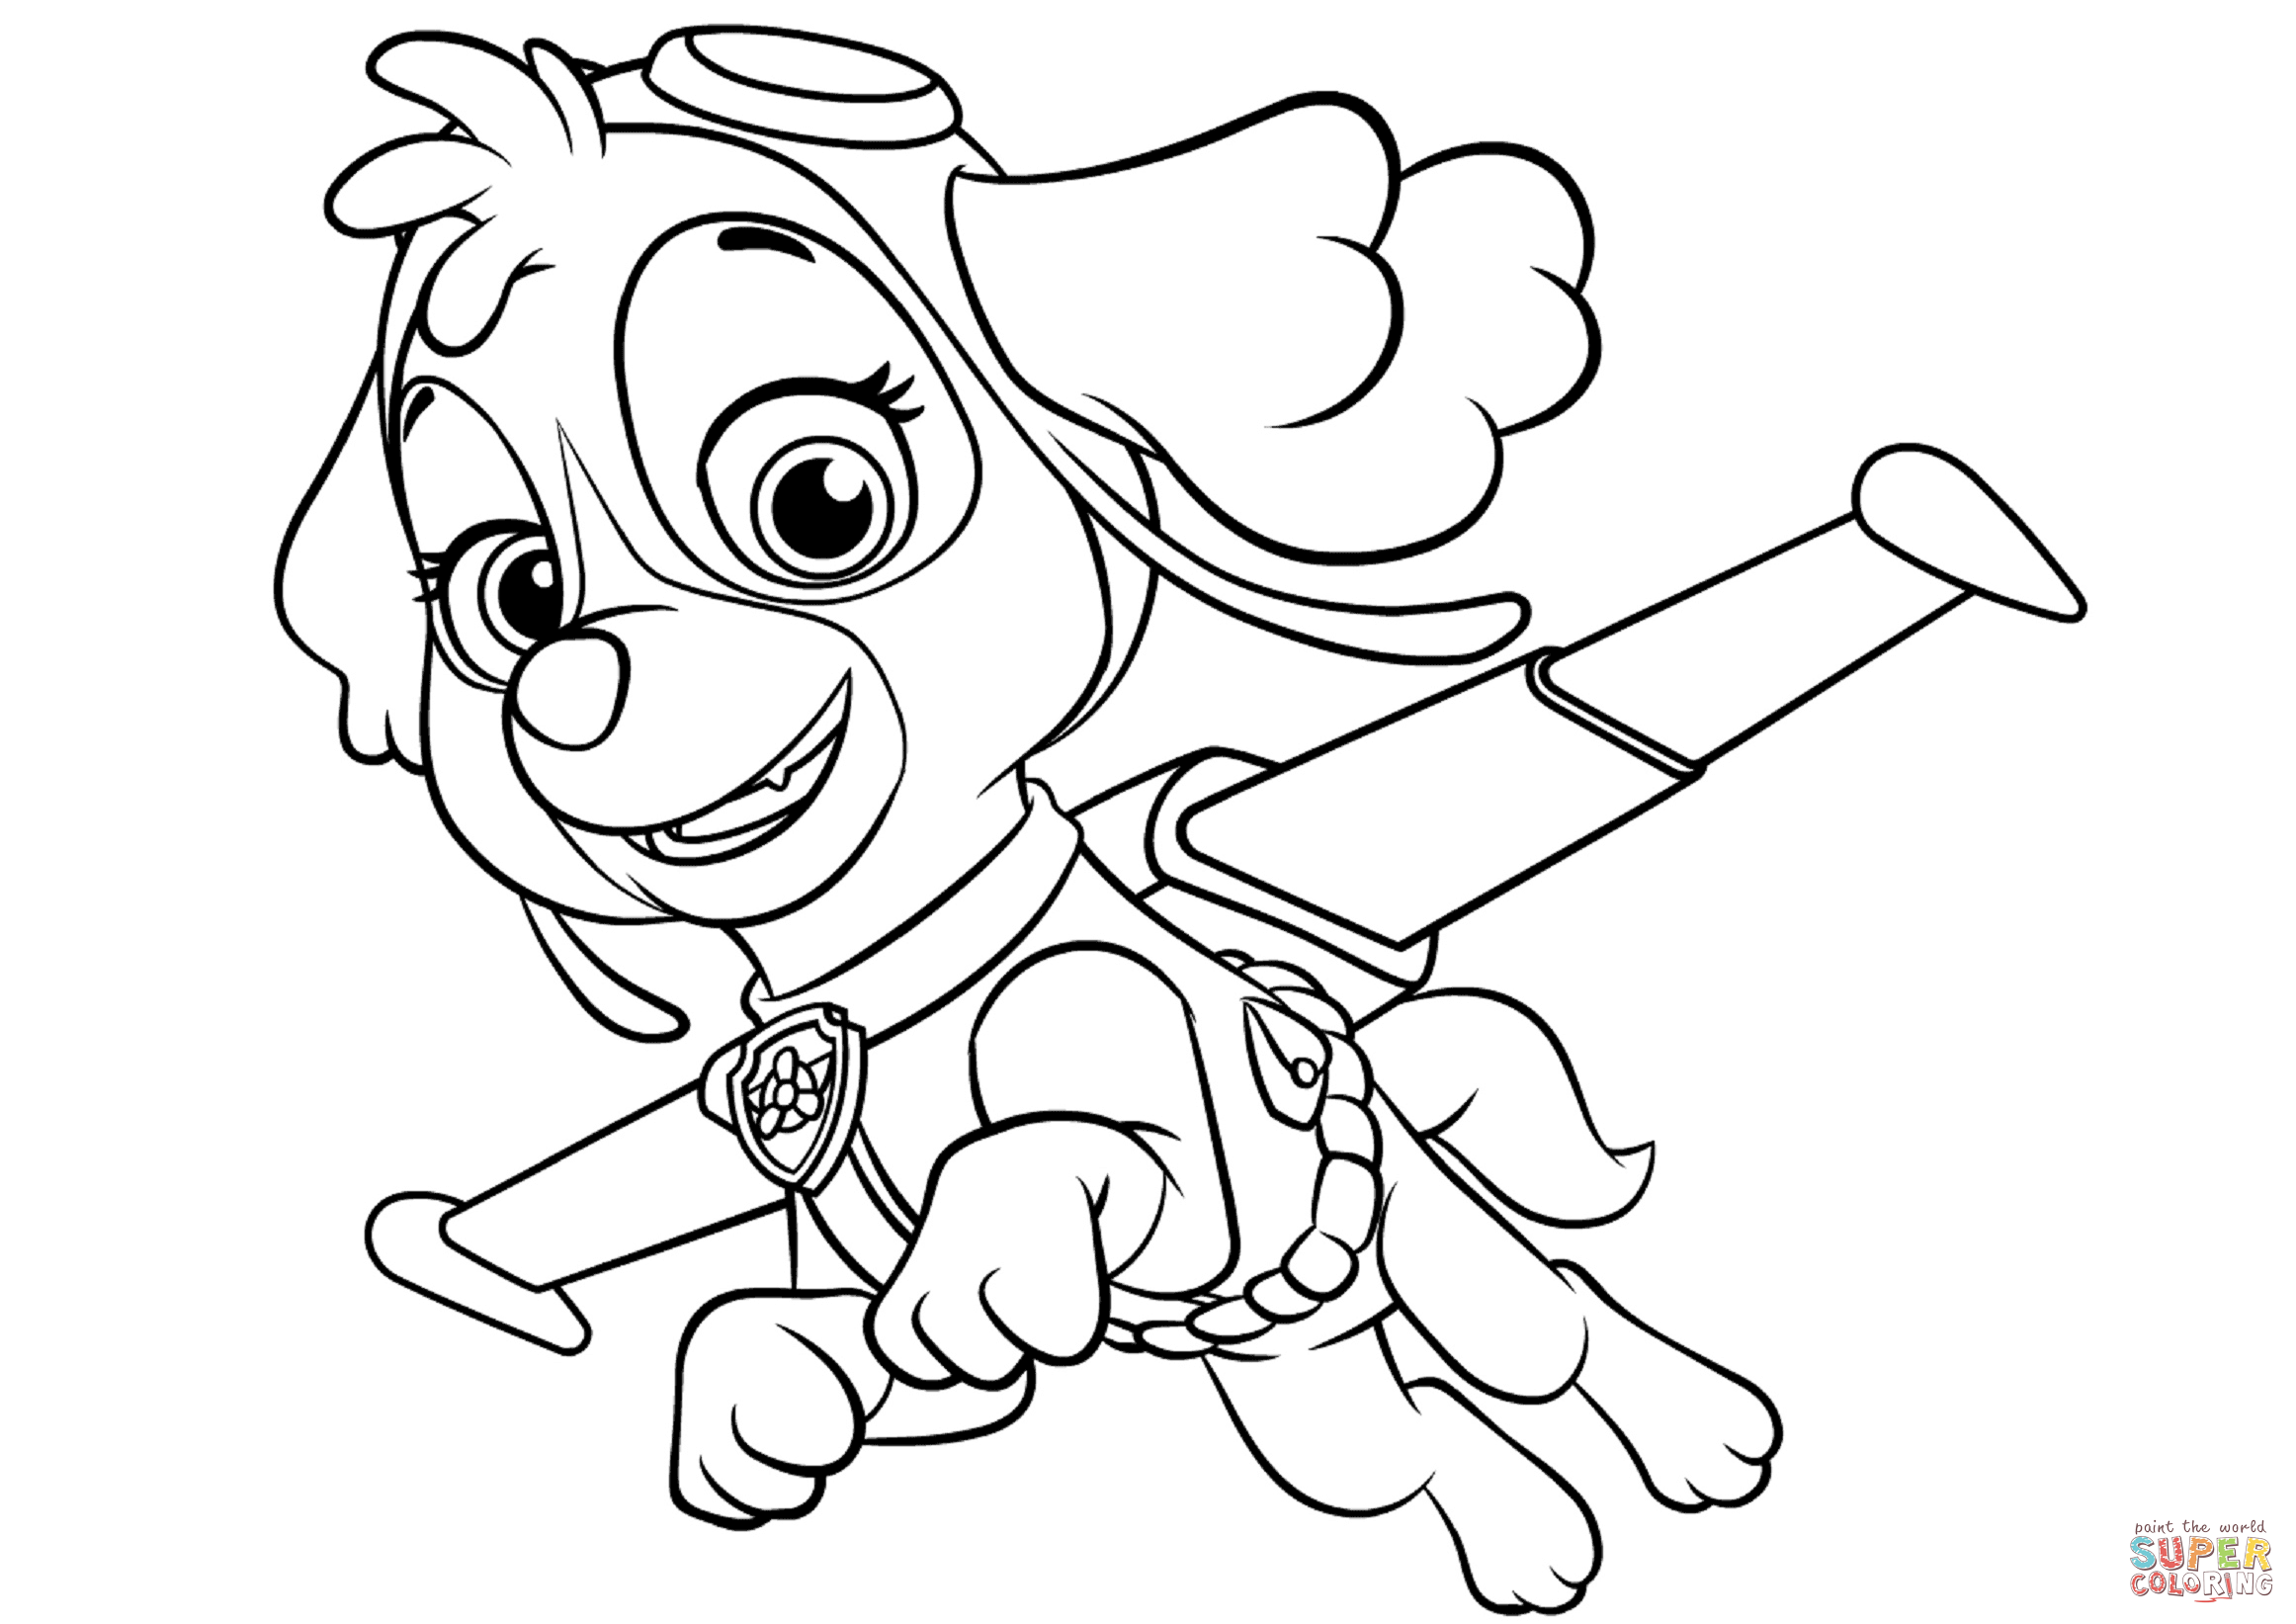 Sky Paw Patrol Coloring Pages   Coloring Home